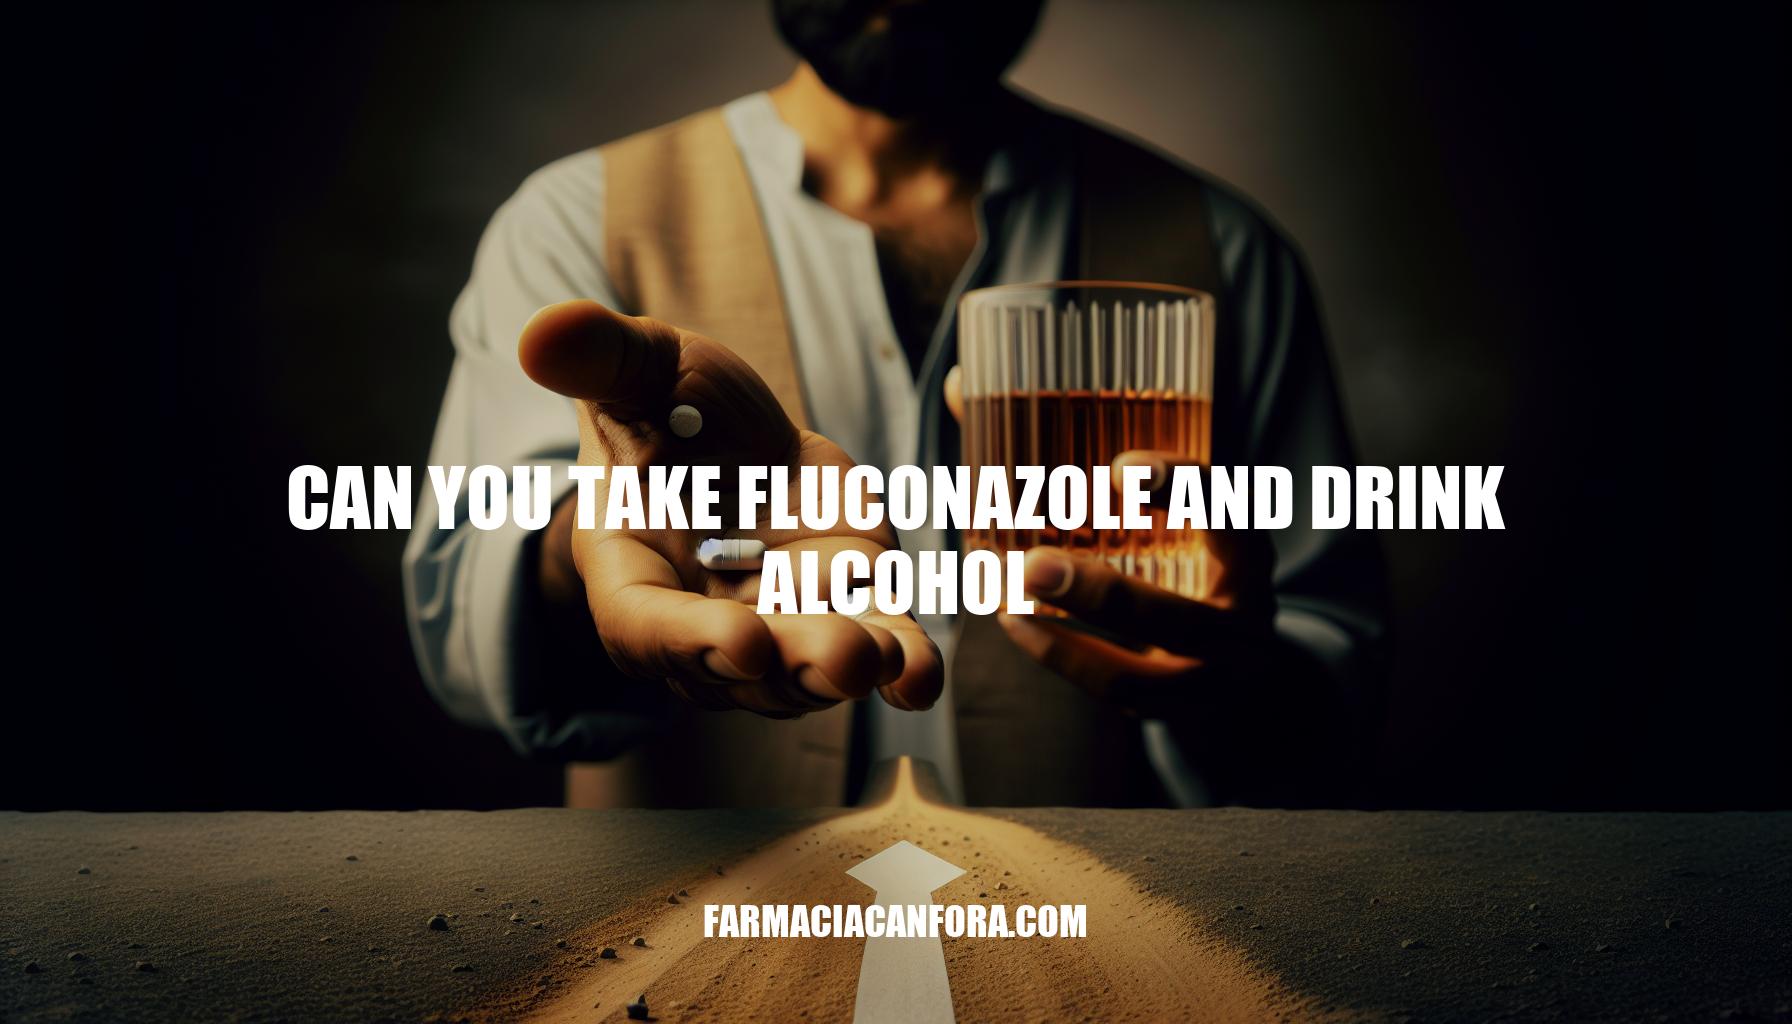 Can You Take Fluconazole and Drink Alcohol: Risks and Guidelines